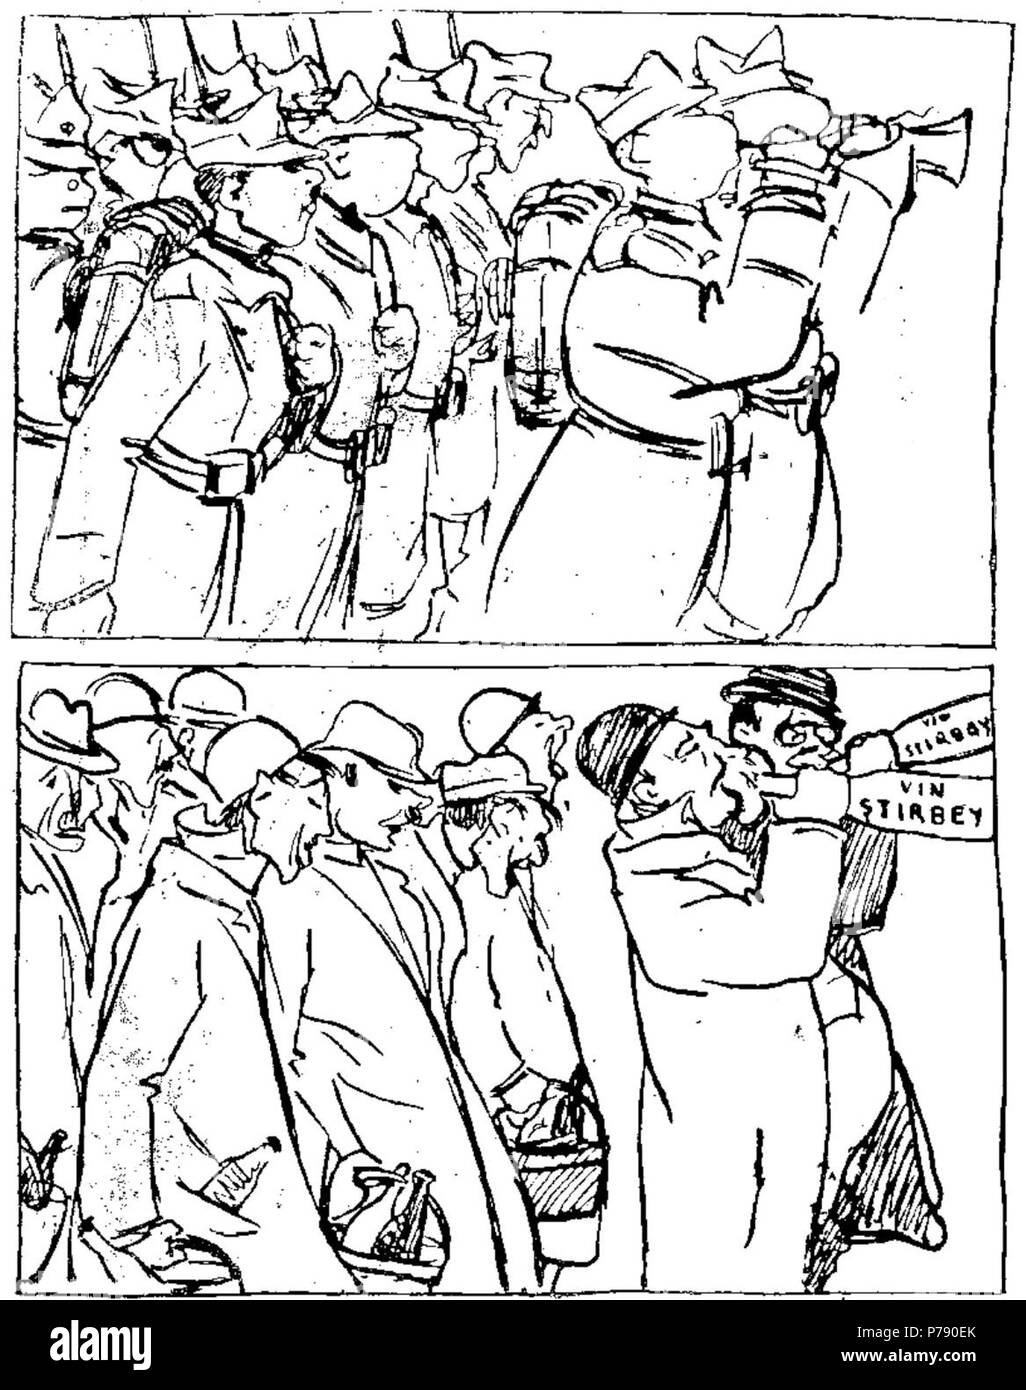 English: Cartoon and advert in the Romanian satirical magazine Furnica, titled Realizarea ideilor socialiste ('Bringing Socialist Ideas to Life'). First panel: Când armata permanent va fi desfiinat, trompeii cazoni vor fi înlocuii cu ... ('Once the standing army shall be disbanded, the military buglers will be replaced with...'). Second panel: ... trompeii civili! ('...civilian buglers!'). The labels read 'tirbey Wine'; one of the two people leading the drunken parade is actor Ion 'Iancu' Brezeanu. 4 March 1910 31 Ion Theodorescu-Sion - Realizarea ideilor socialiste, Furnica, 4 mar 1910 Stock Photo